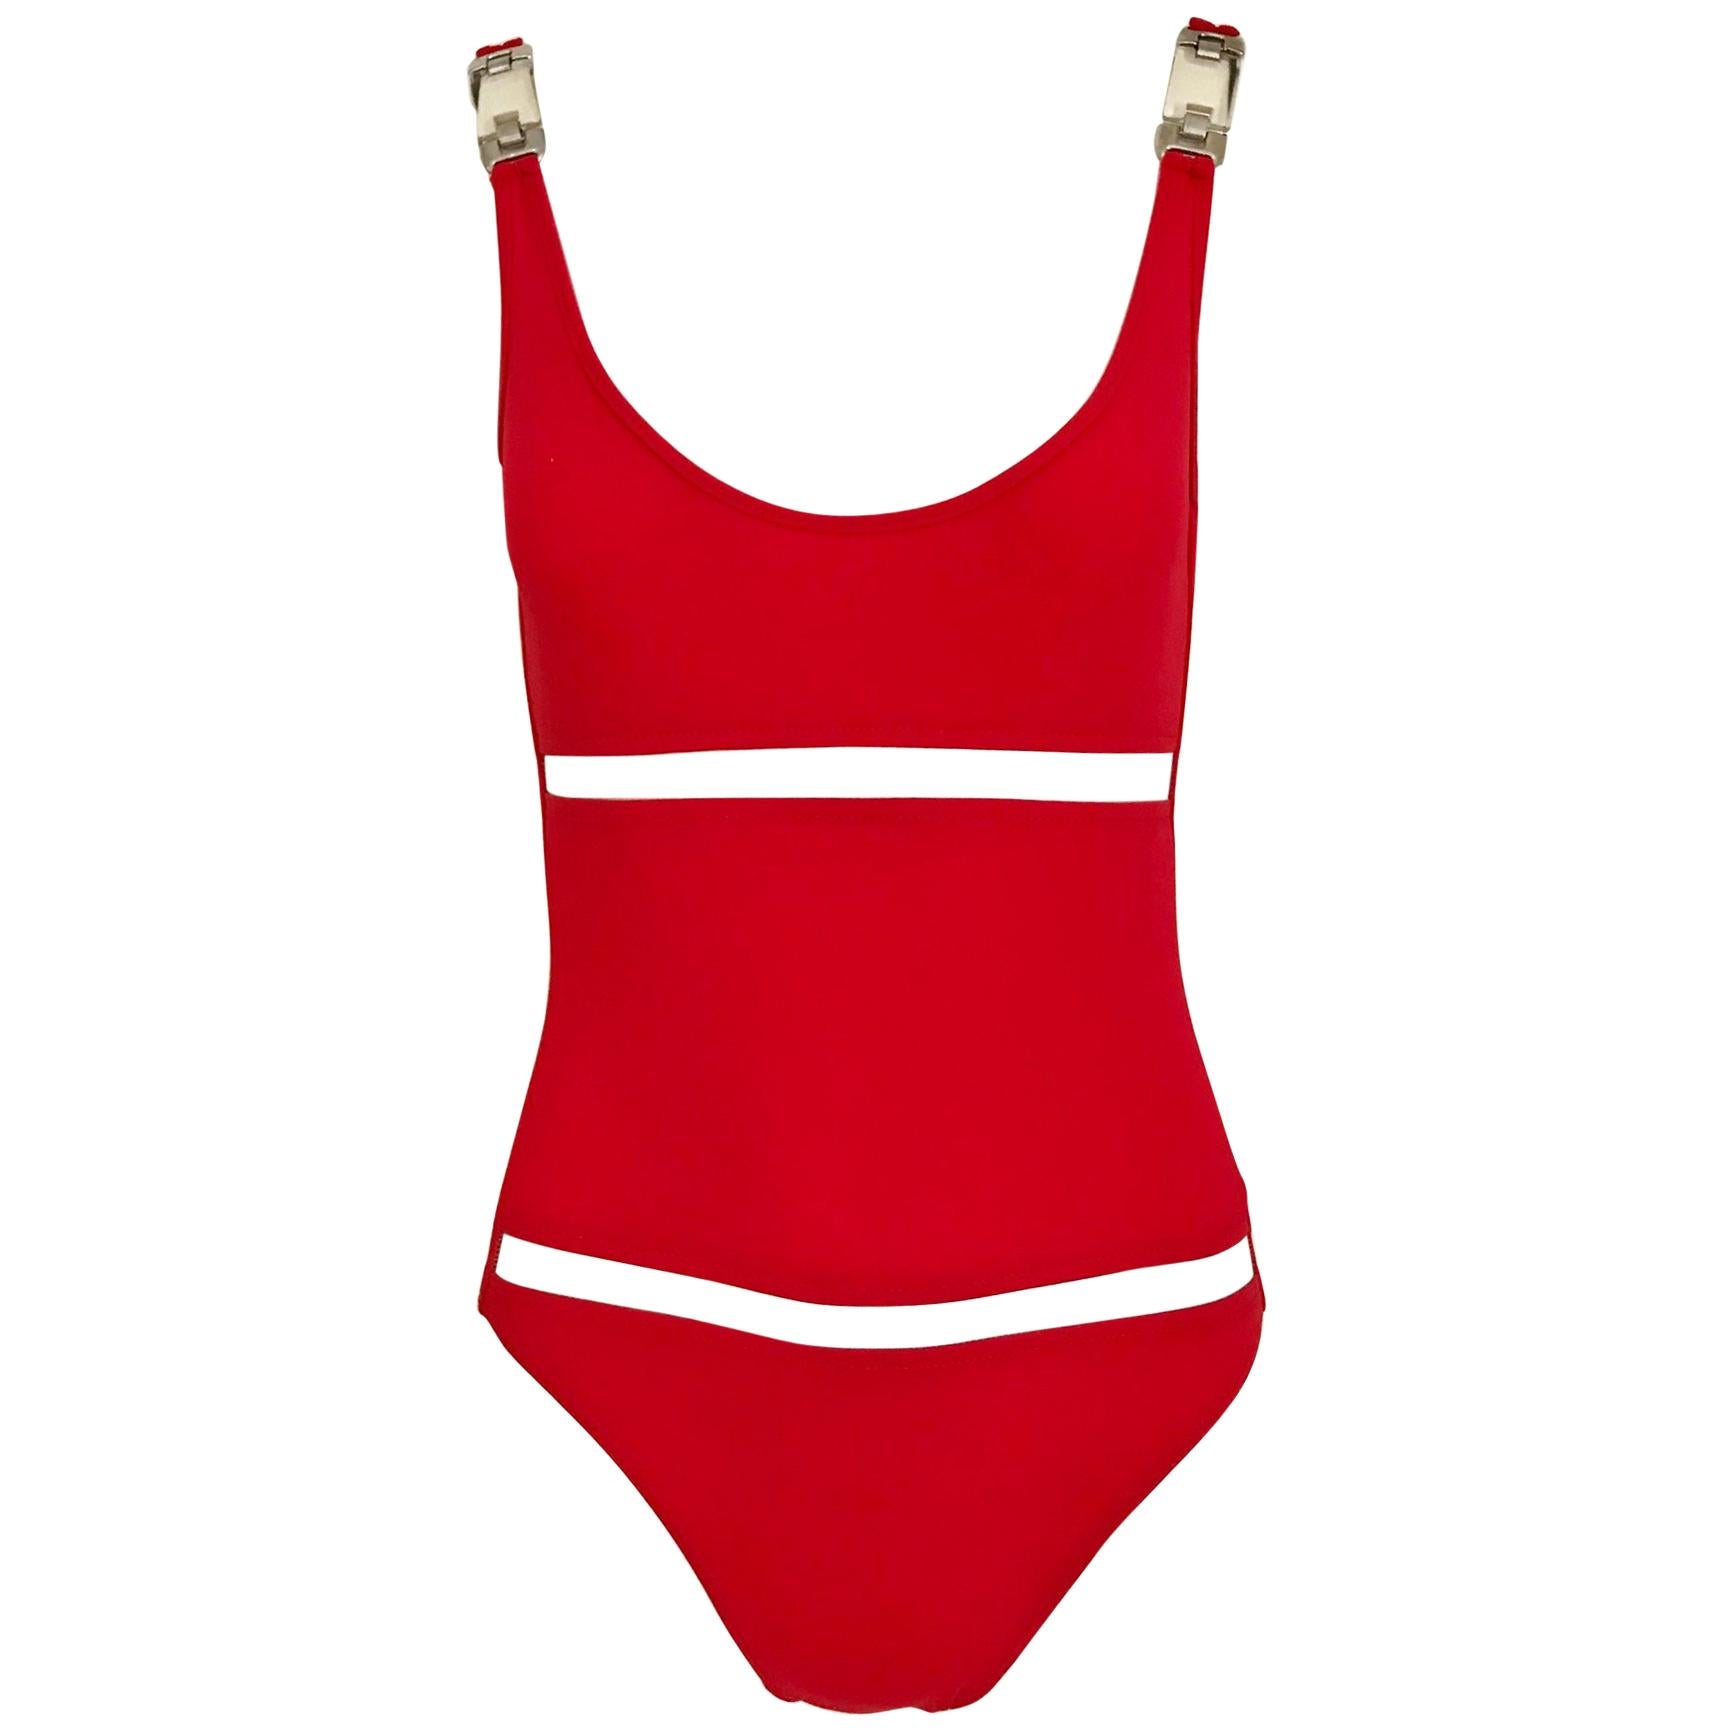 Paco Rabanne Red One Piece Bathing suit